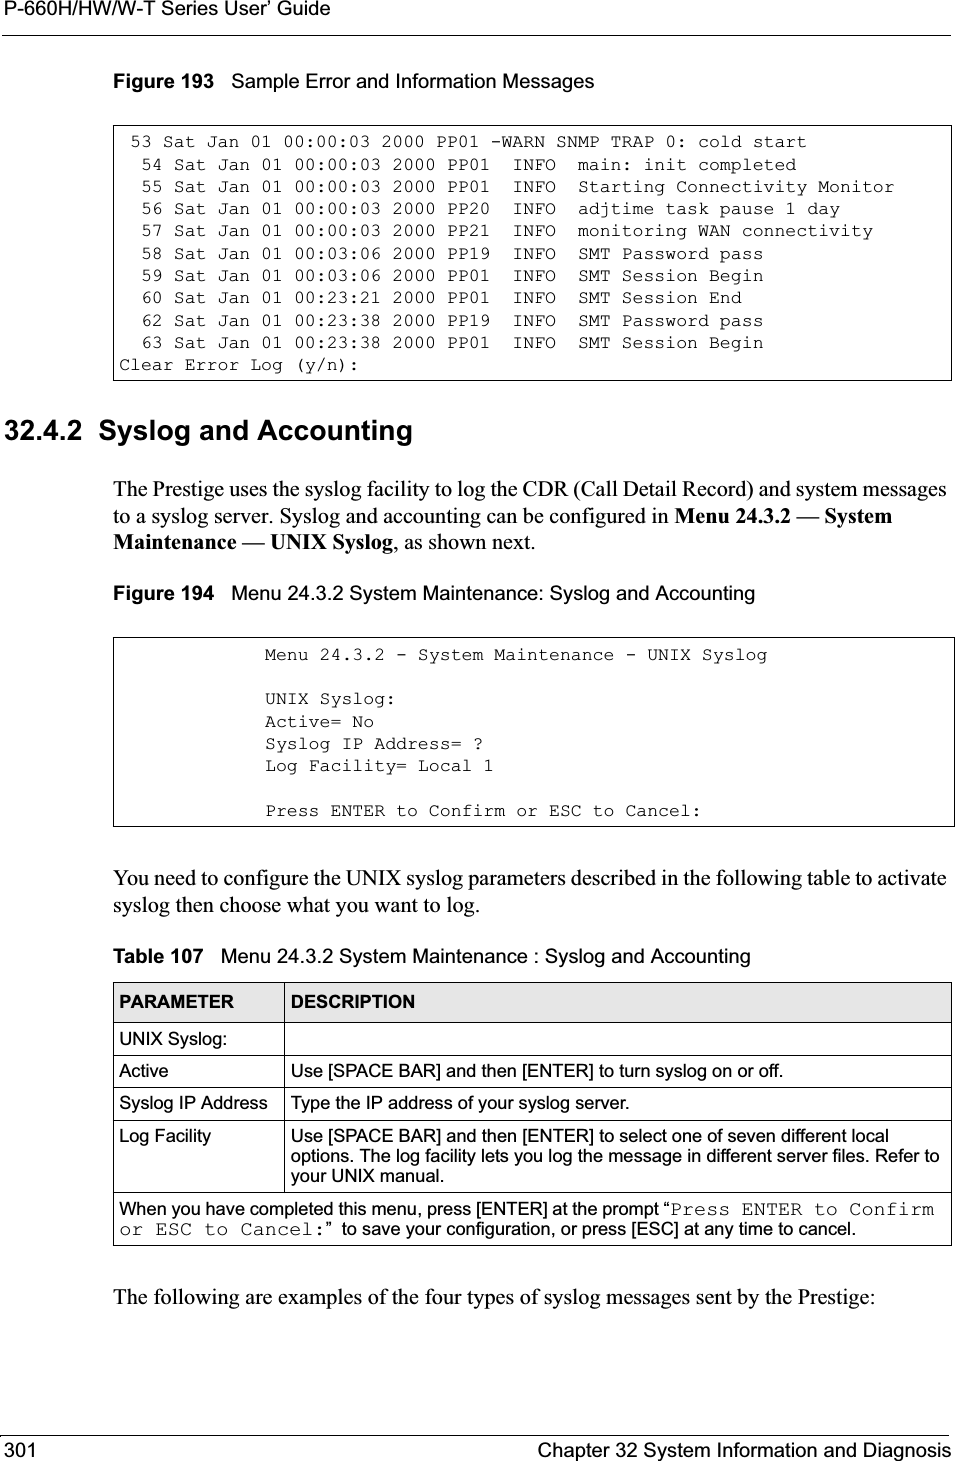 P-660H/HW/W-T Series User’ Guide301 Chapter 32 System Information and DiagnosisFigure 193   Sample Error and Information Messages32.4.2  Syslog and AccountingThe Prestige uses the syslog facility to log the CDR (Call Detail Record) and system messages to a syslog server. Syslog and accounting can be configured in Menu 24.3.2 — SystemMaintenance — UNIX Syslog, as shown next.Figure 194   Menu 24.3.2 System Maintenance: Syslog and AccountingYou need to configure the UNIX syslog parameters described in the following table to activate syslog then choose what you want to log.The following are examples of the four types of syslog messages sent by the Prestige: 53 Sat Jan 01 00:00:03 2000 PP01 -WARN SNMP TRAP 0: cold start  54 Sat Jan 01 00:00:03 2000 PP01  INFO  main: init completed  55 Sat Jan 01 00:00:03 2000 PP01  INFO  Starting Connectivity Monitor  56 Sat Jan 01 00:00:03 2000 PP20  INFO  adjtime task pause 1 day  57 Sat Jan 01 00:00:03 2000 PP21  INFO  monitoring WAN connectivity  58 Sat Jan 01 00:03:06 2000 PP19  INFO  SMT Password pass  59 Sat Jan 01 00:03:06 2000 PP01  INFO  SMT Session Begin  60 Sat Jan 01 00:23:21 2000 PP01  INFO  SMT Session End  62 Sat Jan 01 00:23:38 2000 PP19  INFO  SMT Password pass  63 Sat Jan 01 00:23:38 2000 PP01  INFO  SMT Session BeginClear Error Log (y/n):Menu 24.3.2 - System Maintenance - UNIX SyslogUNIX Syslog:Active= NoSyslog IP Address= ?Log Facility= Local 1Press ENTER to Confirm or ESC to Cancel:Table 107   Menu 24.3.2 System Maintenance : Syslog and AccountingPARAMETER DESCRIPTIONUNIX Syslog:Active Use [SPACE BAR] and then [ENTER] to turn syslog on or off.Syslog IP Address Type the IP address of your syslog server.Log Facility Use [SPACE BAR] and then [ENTER] to select one of seven different local options. The log facility lets you log the message in different server files. Refer to your UNIX manual.When you have completed this menu, press [ENTER] at the prompt “Press ENTER to Confirm or ESC to Cancel:”  to save your configuration, or press [ESC] at any time to cancel.